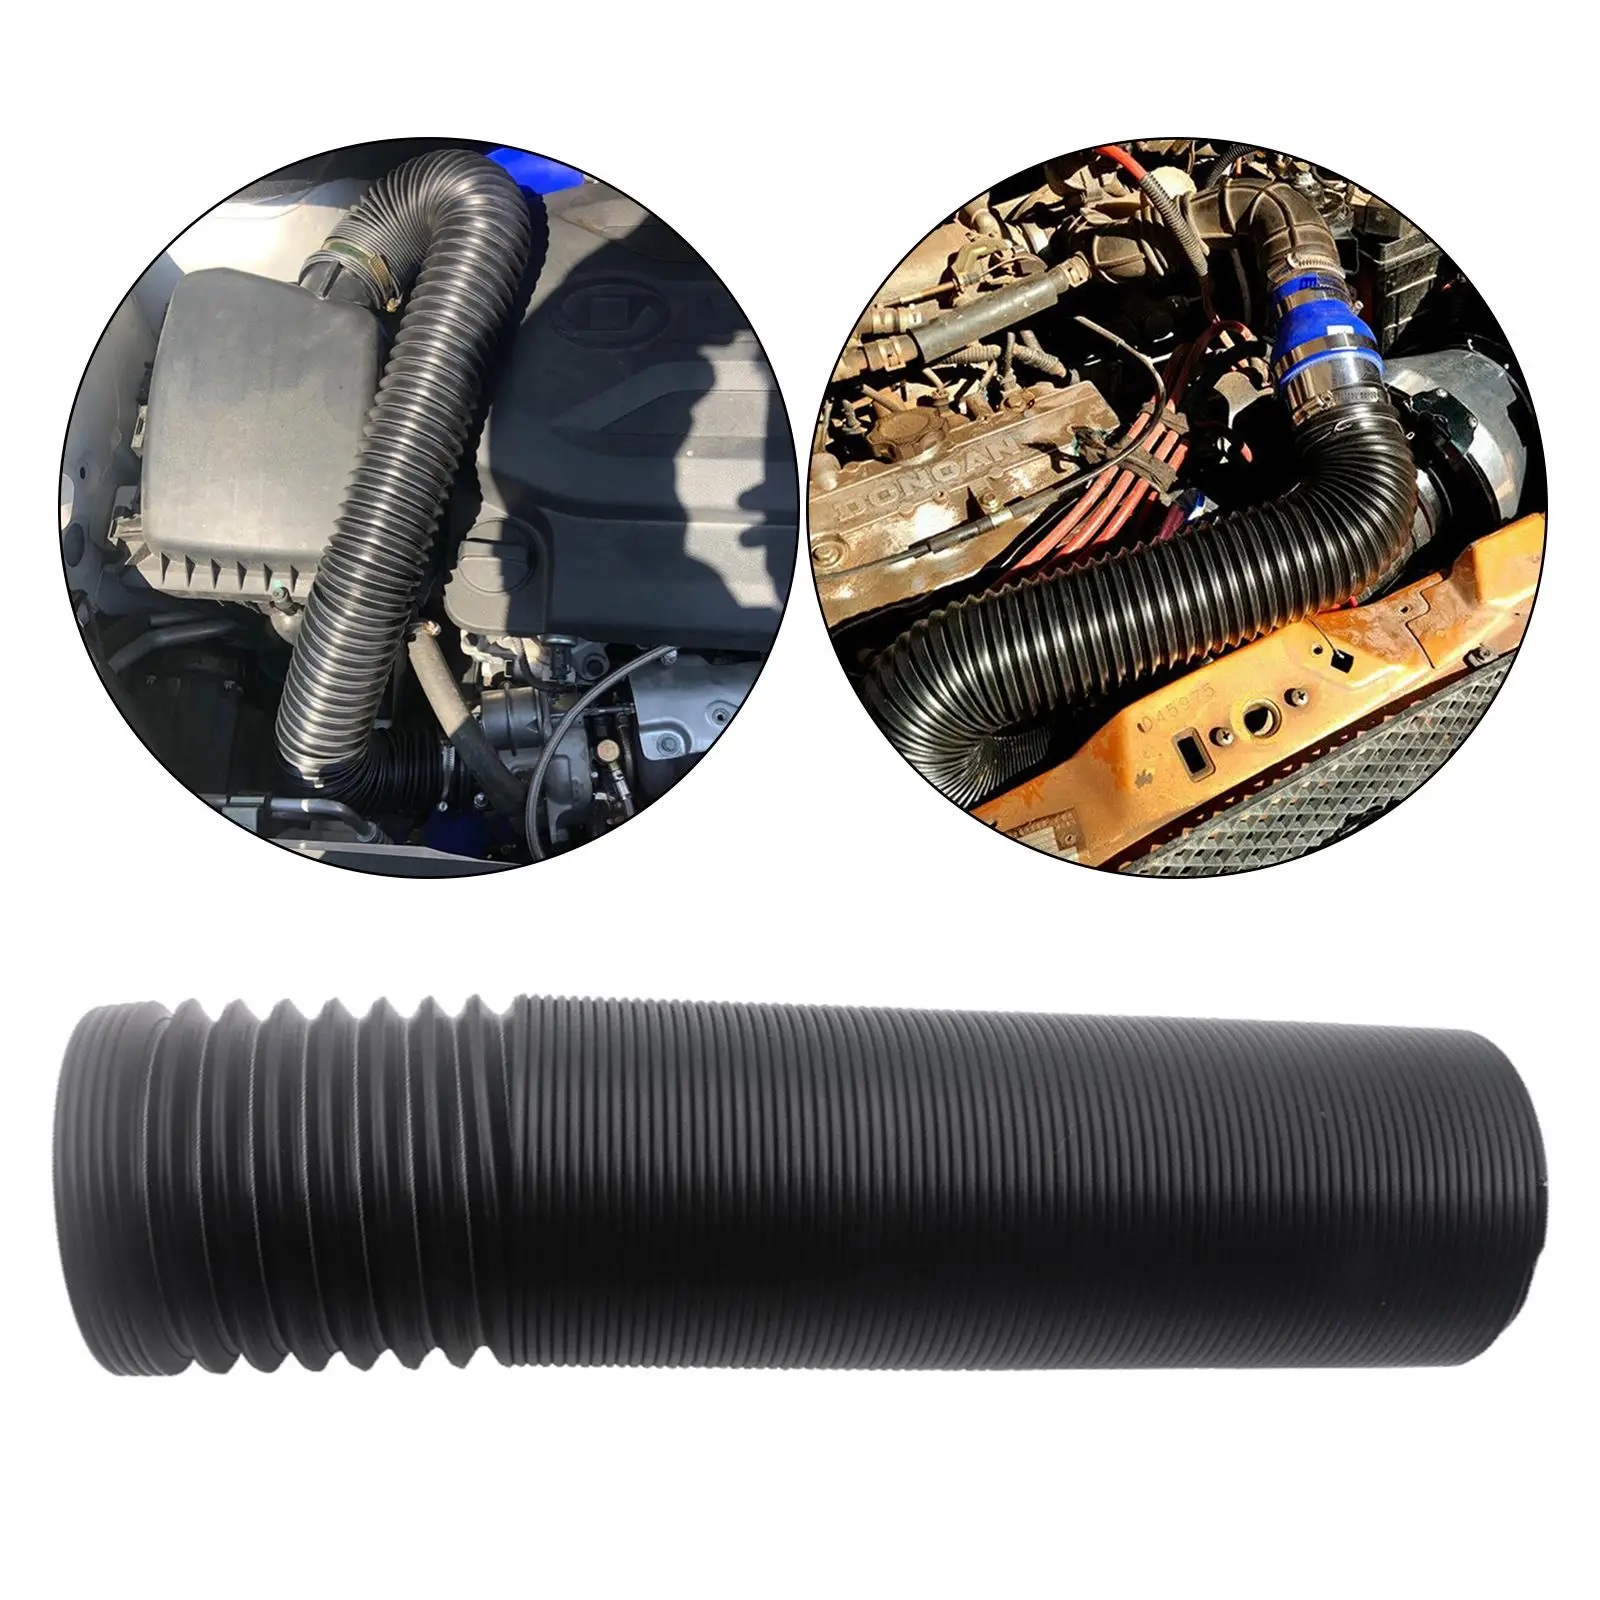 Air Intake Pipe Flexible Pipe Ducting Hose 76mm Diameter Expansion Pipe PVC Fit for Car Accessory Durable Premium Spare Parts